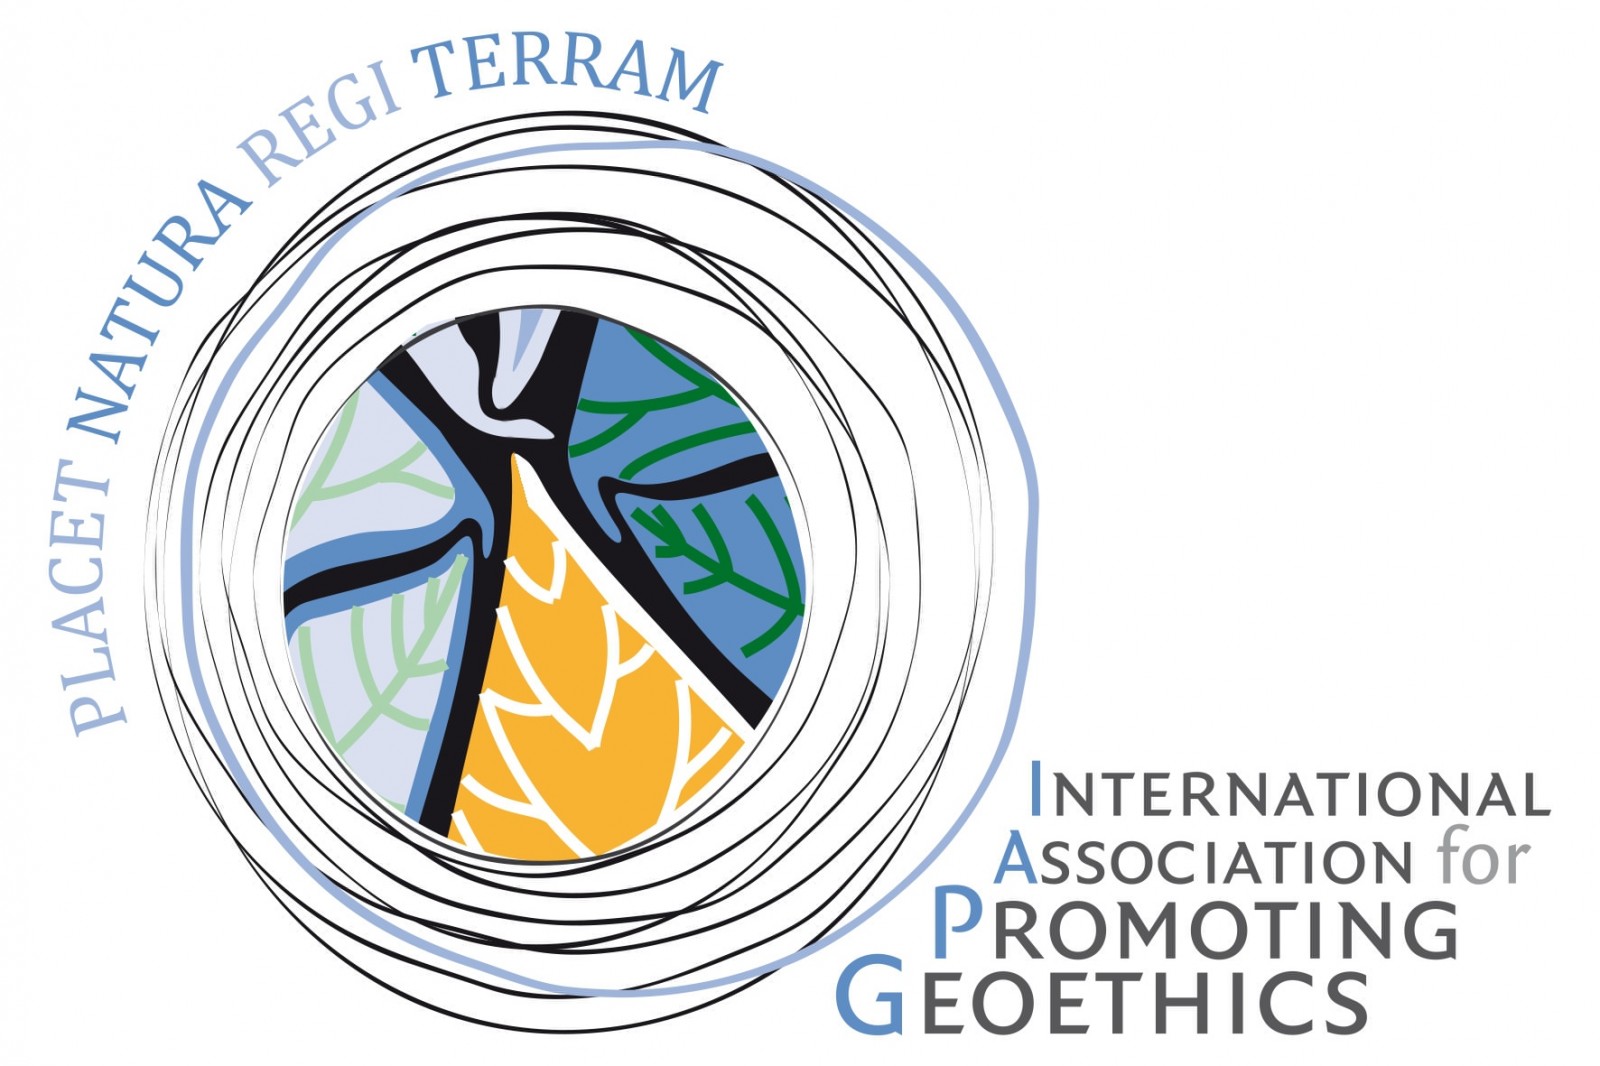 Ethics and Geosciences: discovering the International Association for Promoting Geoethics